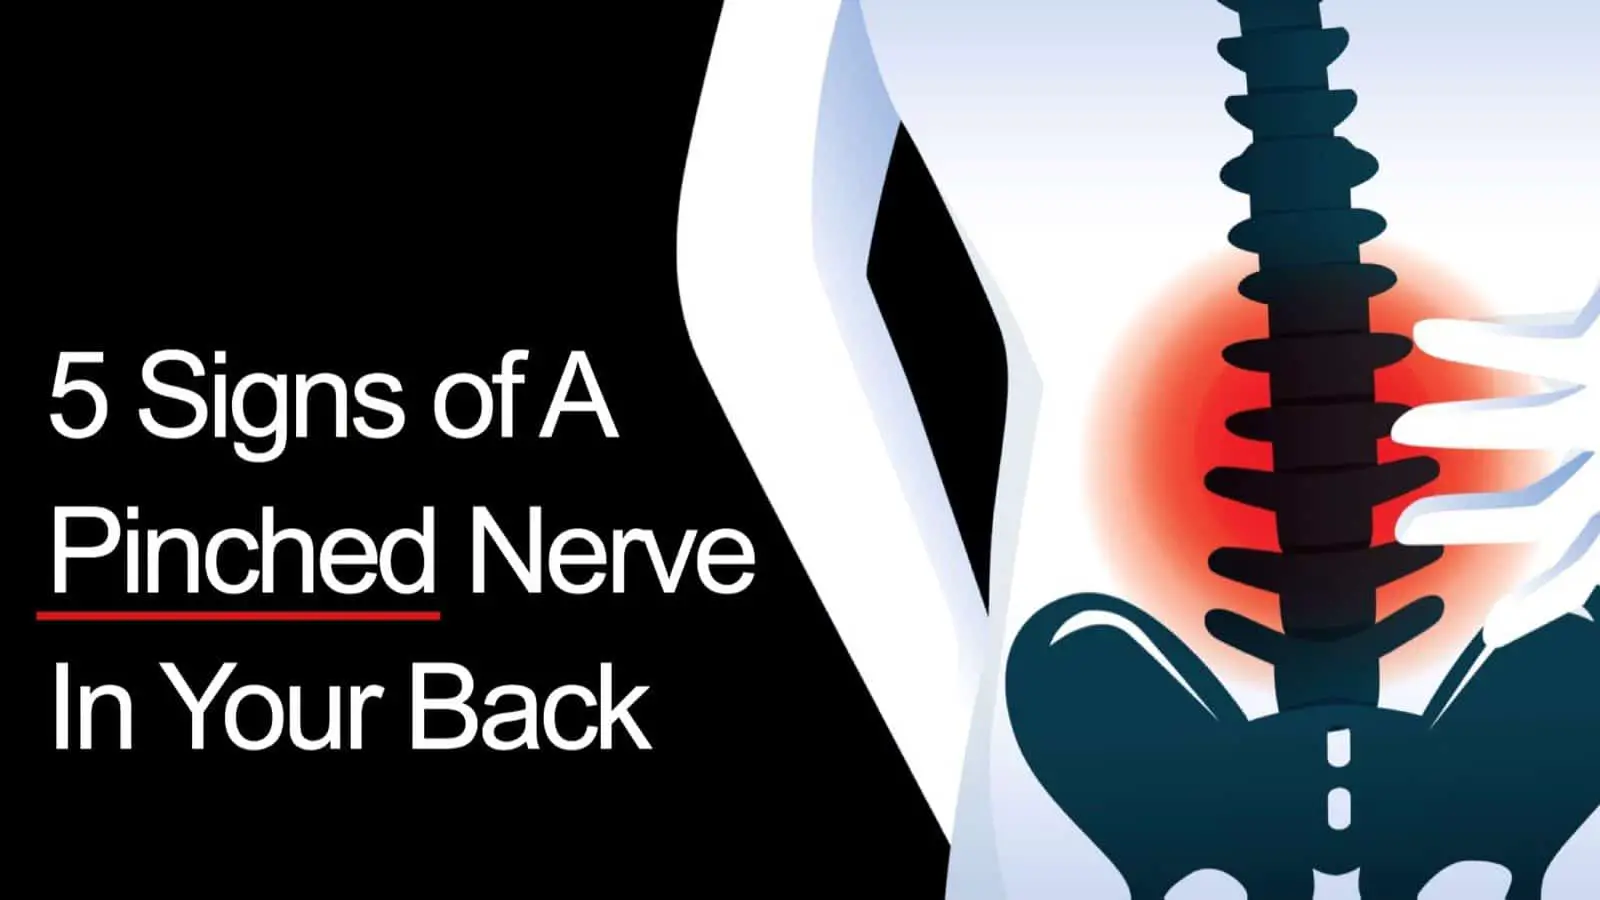 5 Signs of a Pinched Nerve In Your Back